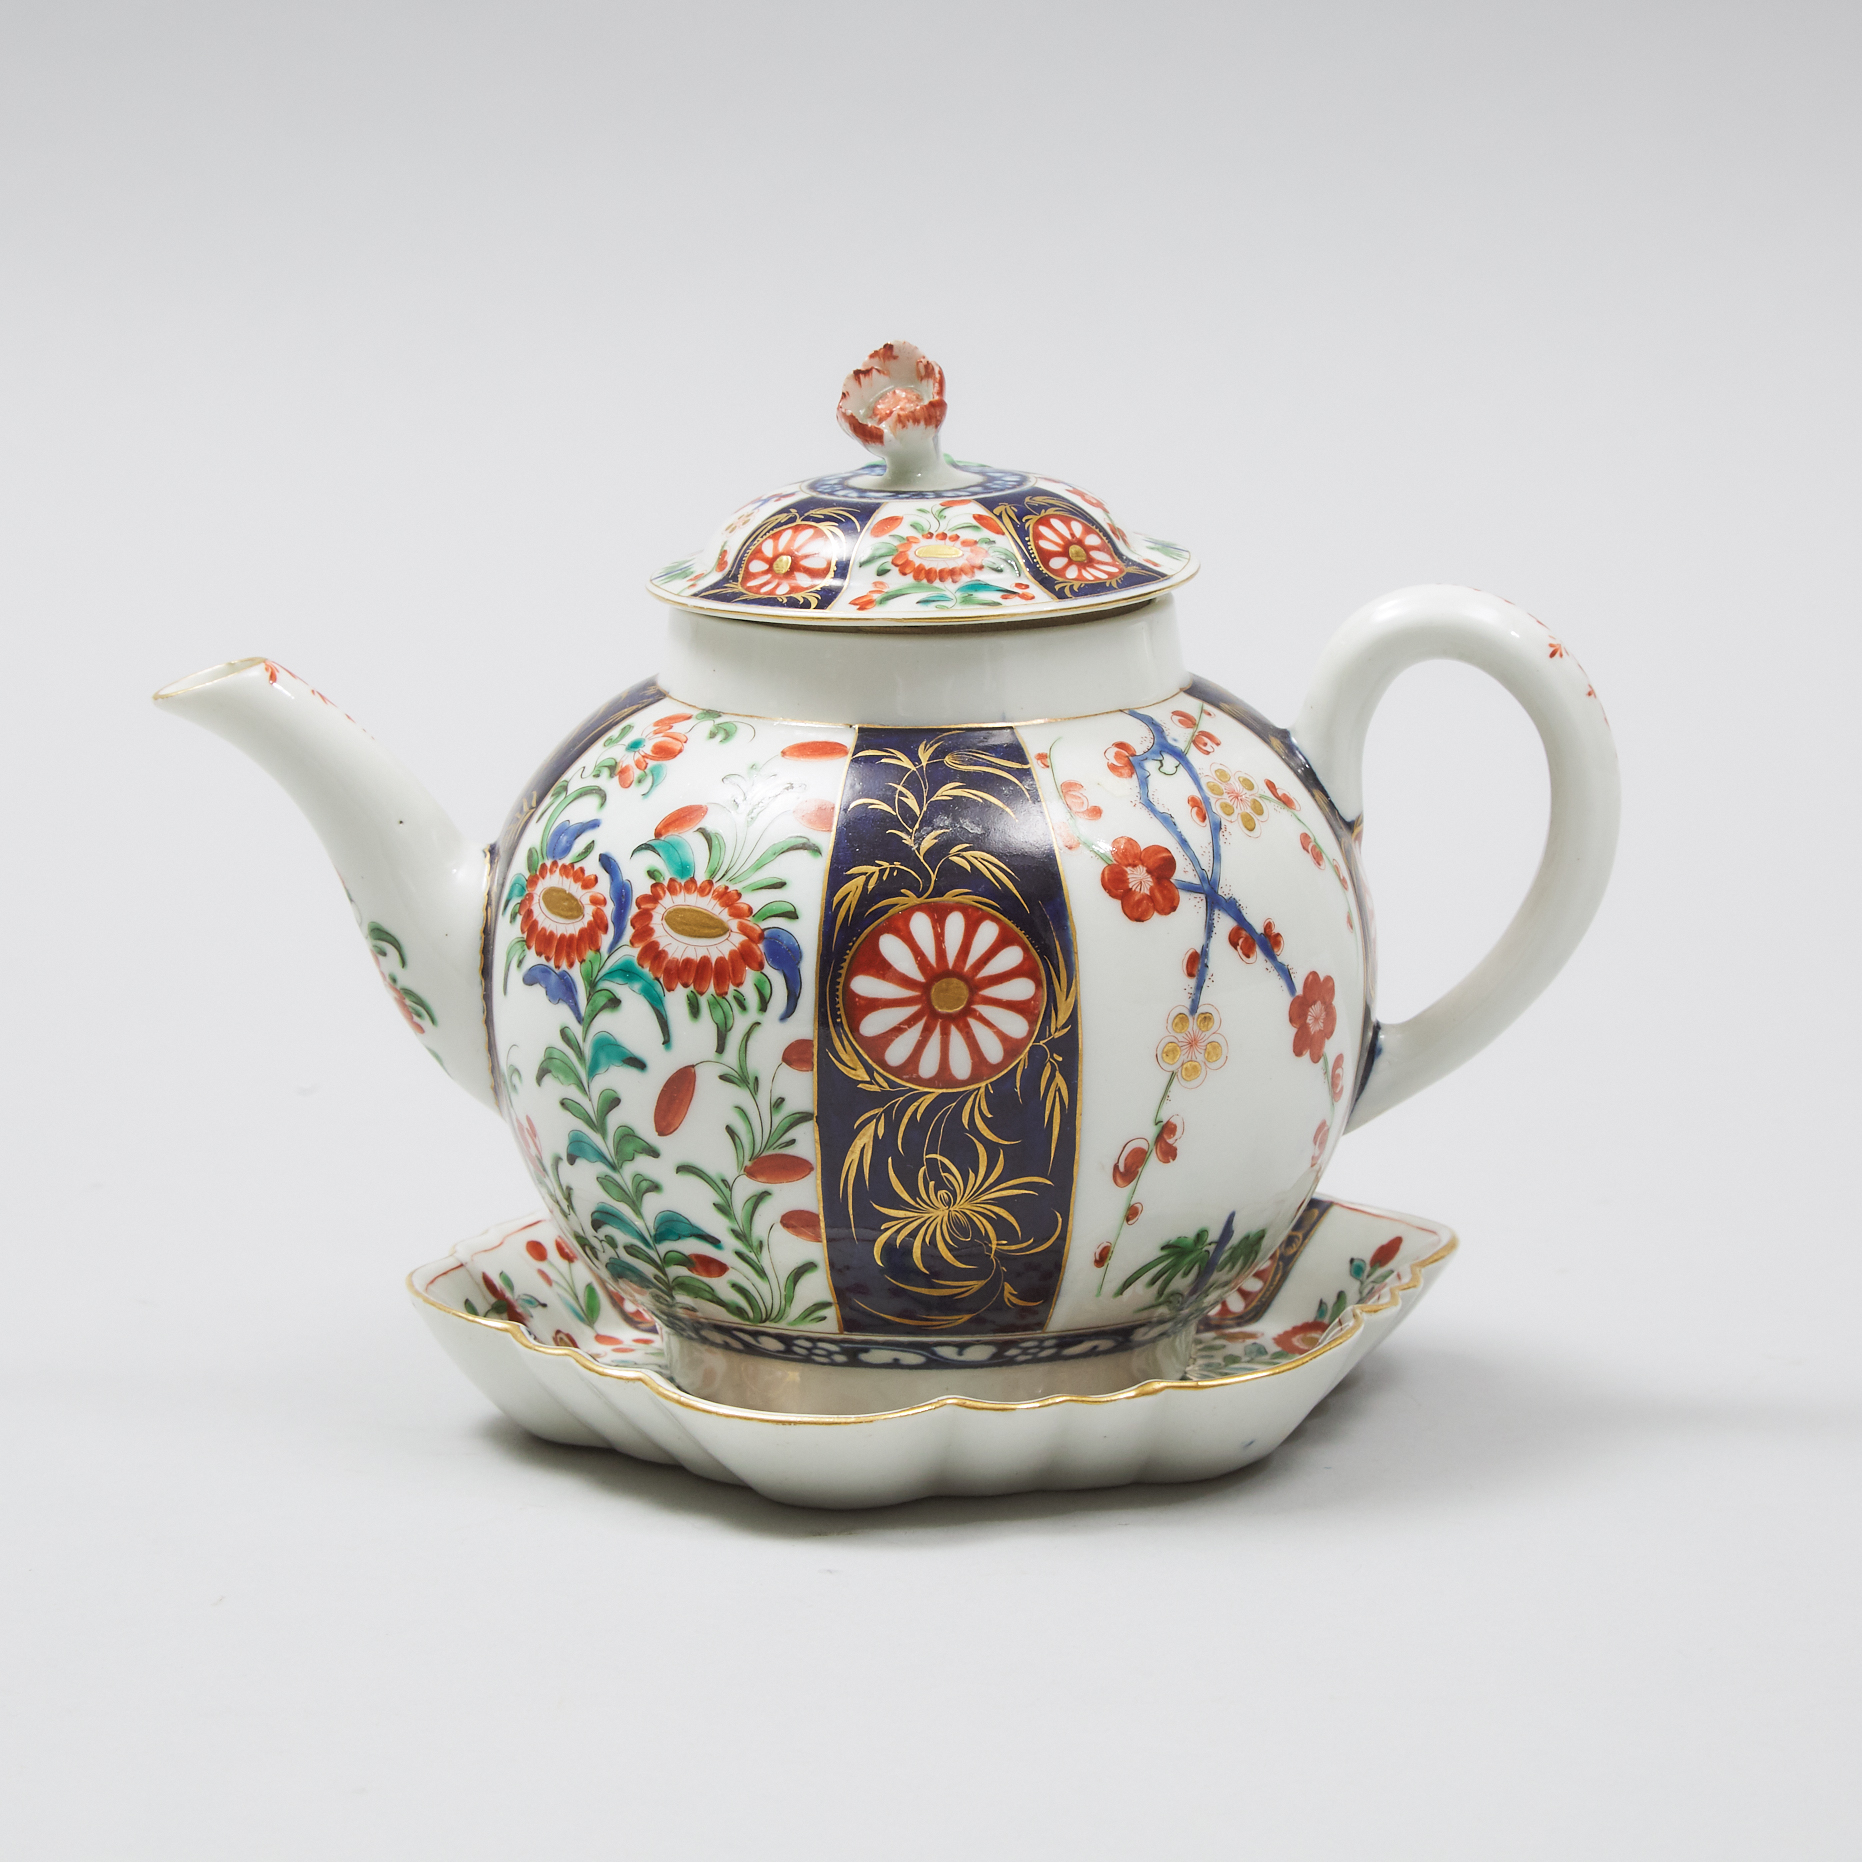 Worcester Japan Pattern Teapot with Cover and a Stand, c.1770